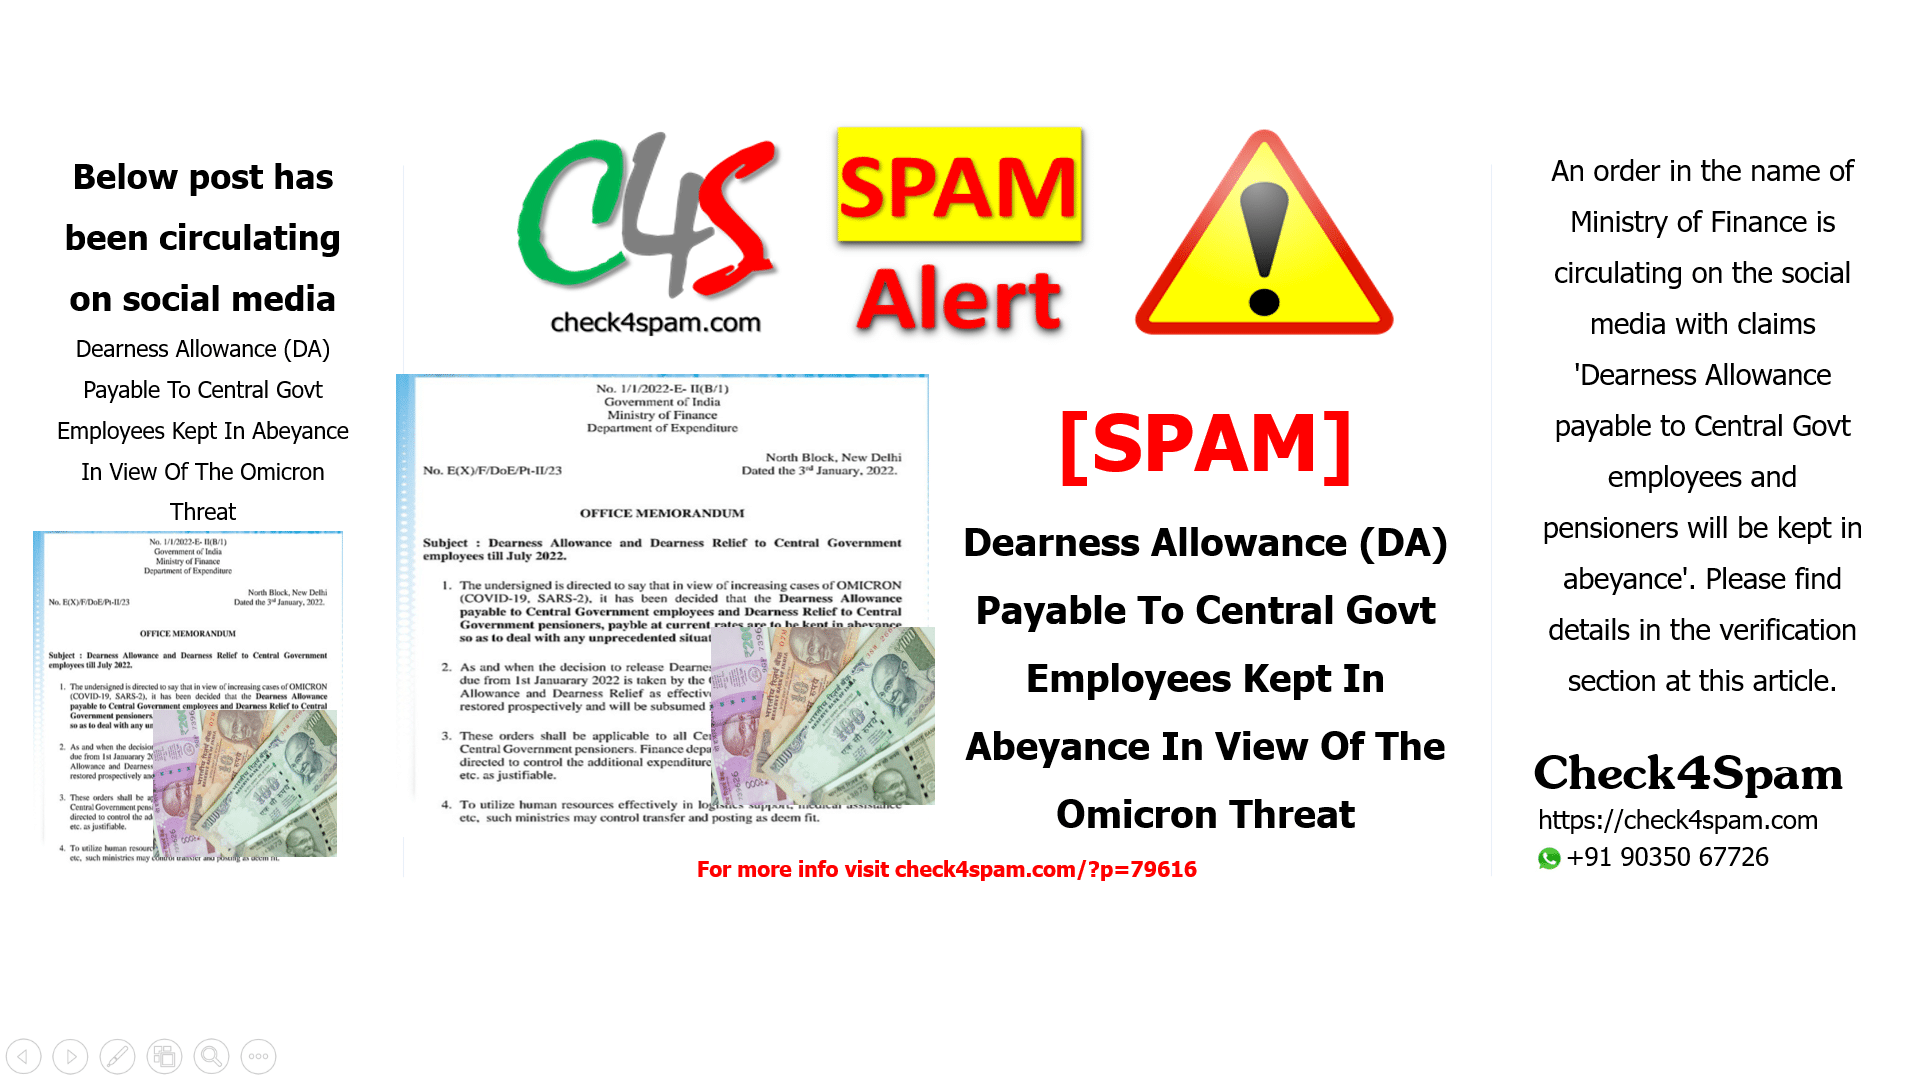 Dearness Allowance (DA) Payable To Central Govt Employees Kept In Abeyance In View Of The Omicron Threat